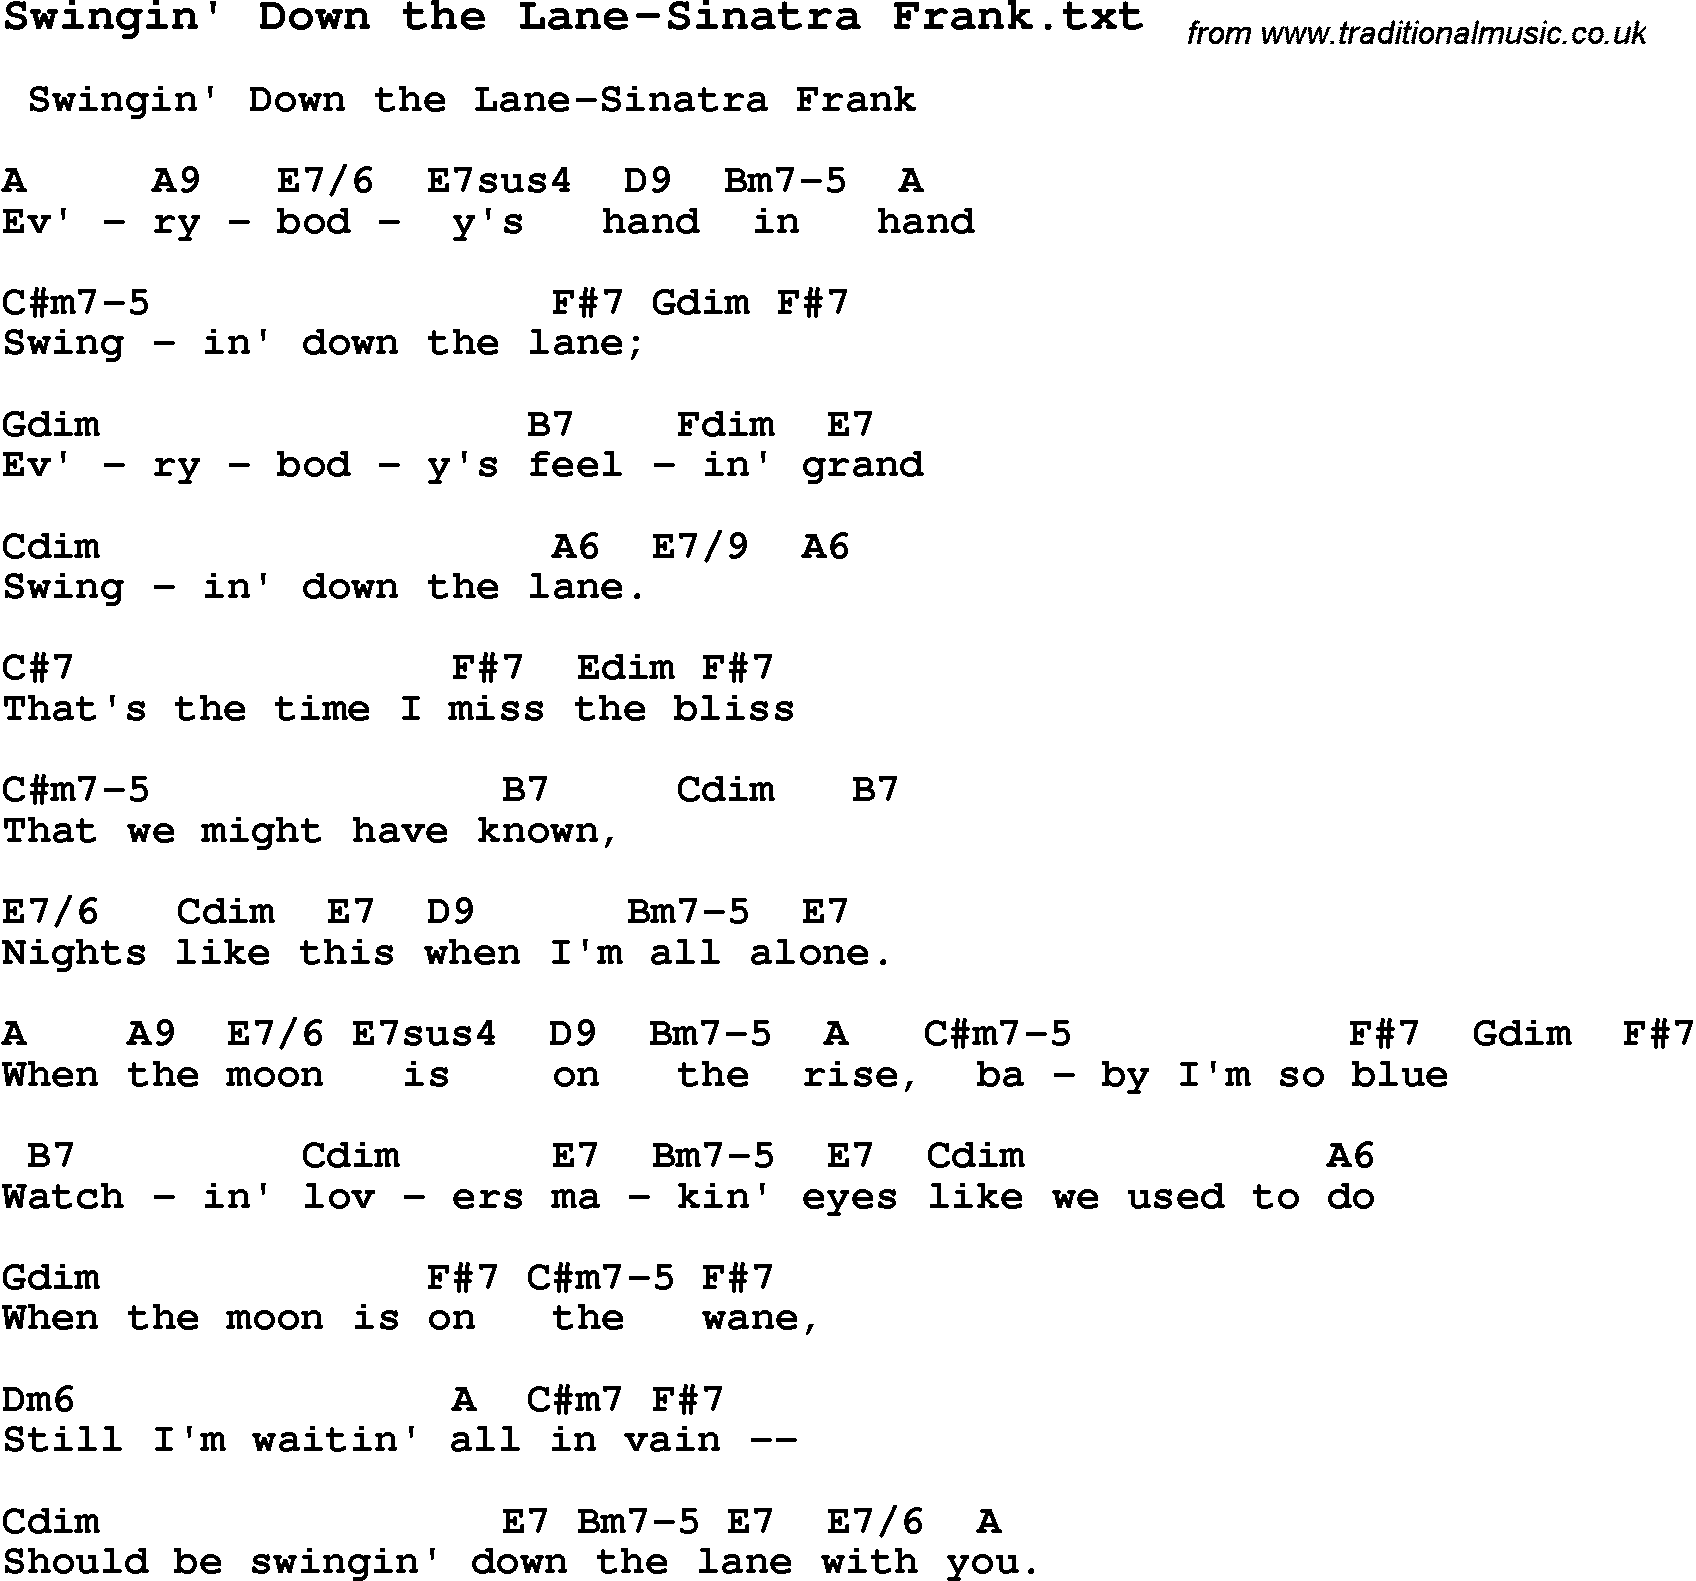 Jazz Song from top bands and vocal artists with chords, tabs and lyrics - Swingin' Down the Lane-Sinatra Frank